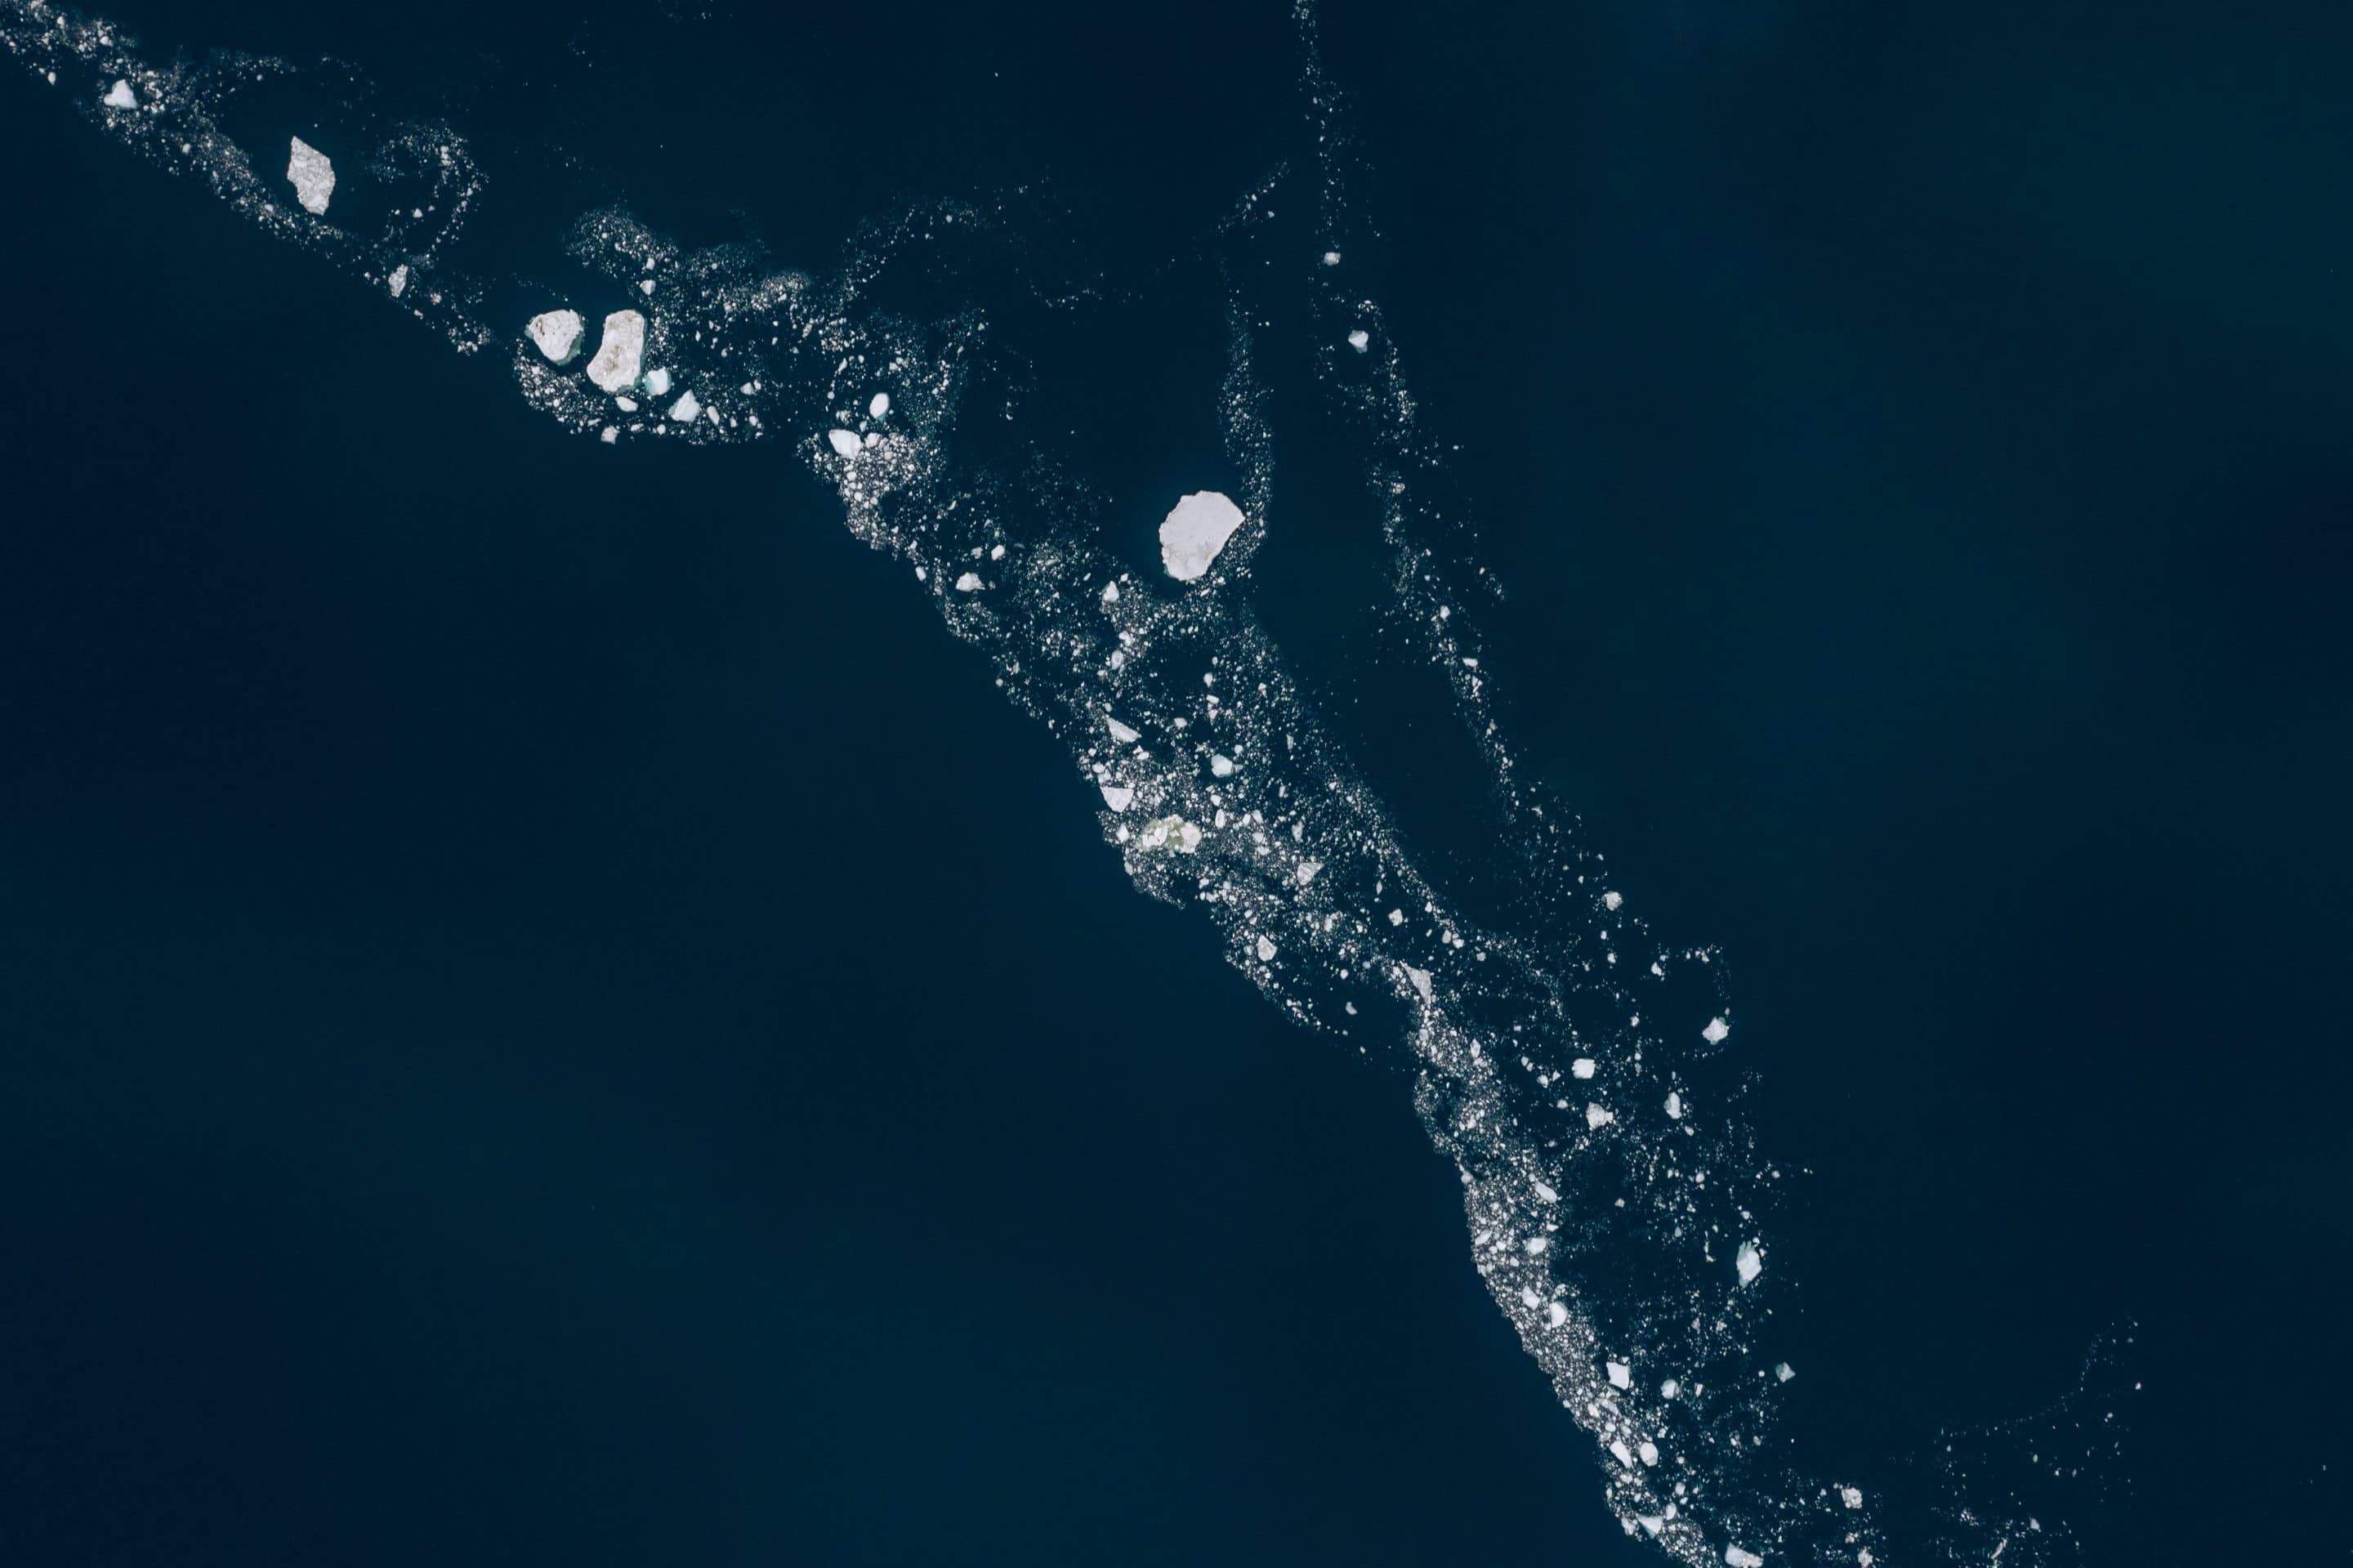 Fine art aerial photography series that sees the sea ice in Greenland as stars and galaxies that are forming a universe in the calm Atlantic ocean by Michael Schauer